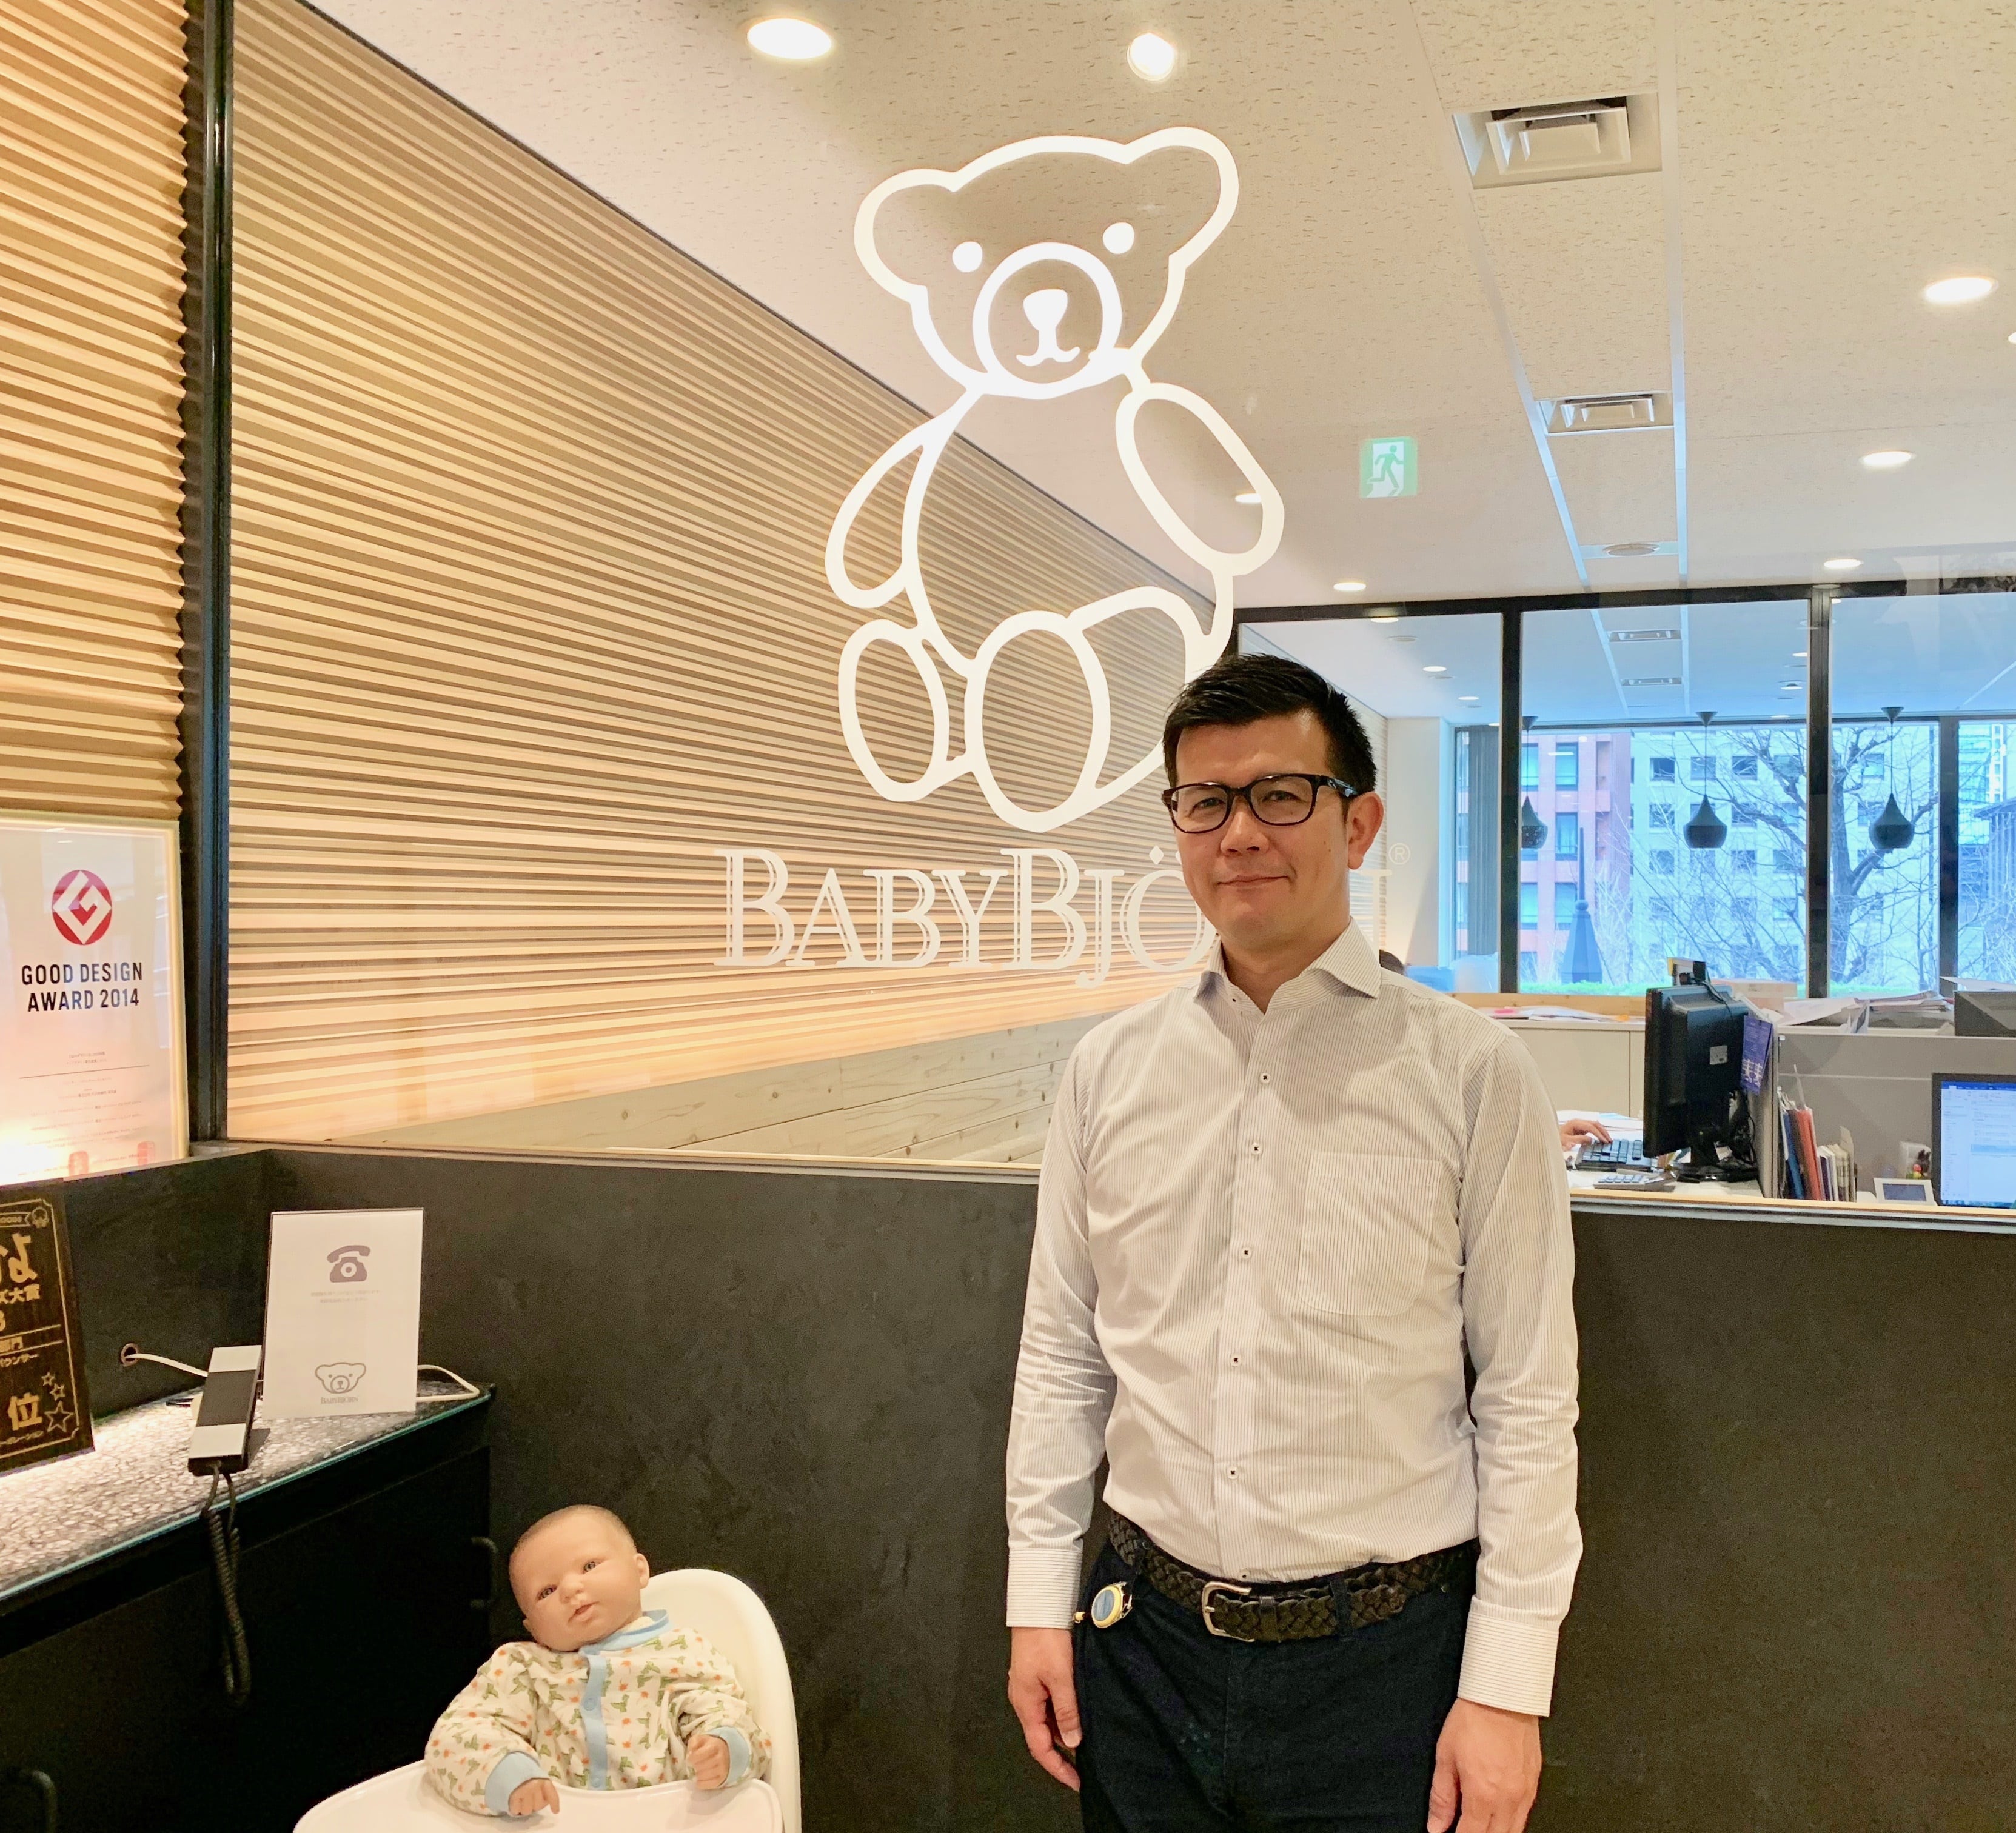 Member Introduction: Babybjörn - Putting a New Bounce into Child-raising 